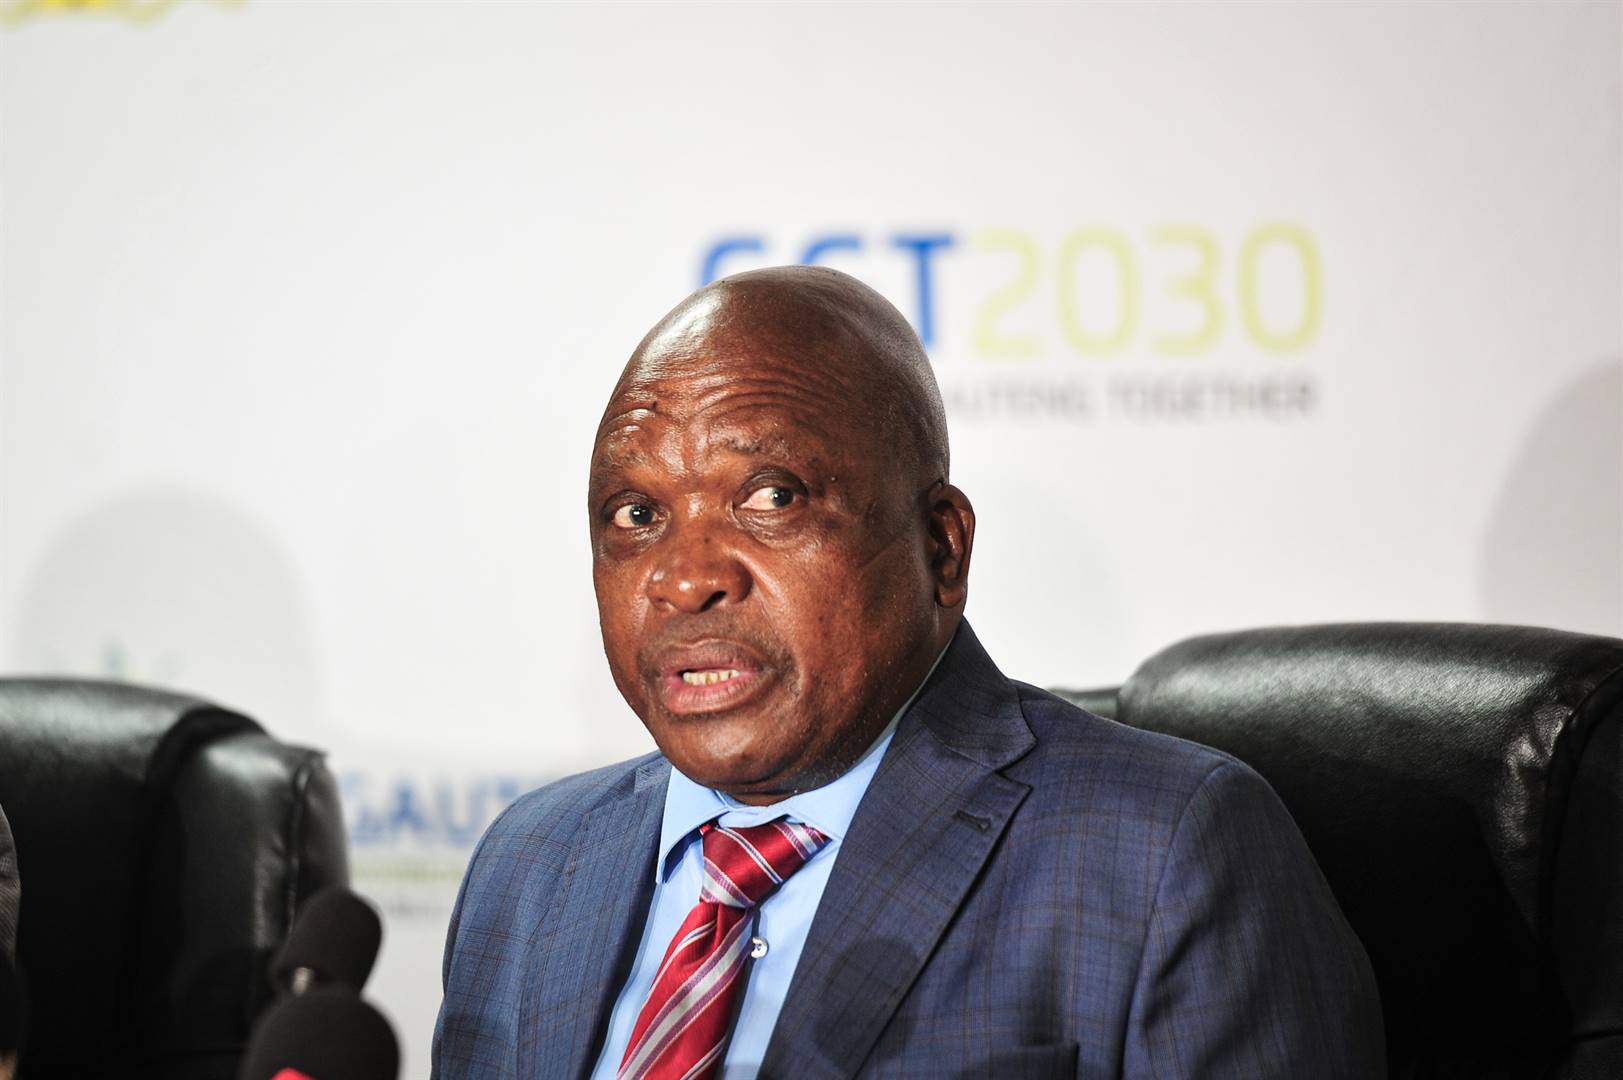 Health Minister Dr Joe Phaahla says the department will not contest a court order directing the department to reveal contract negotiations with pharmaceutical firms